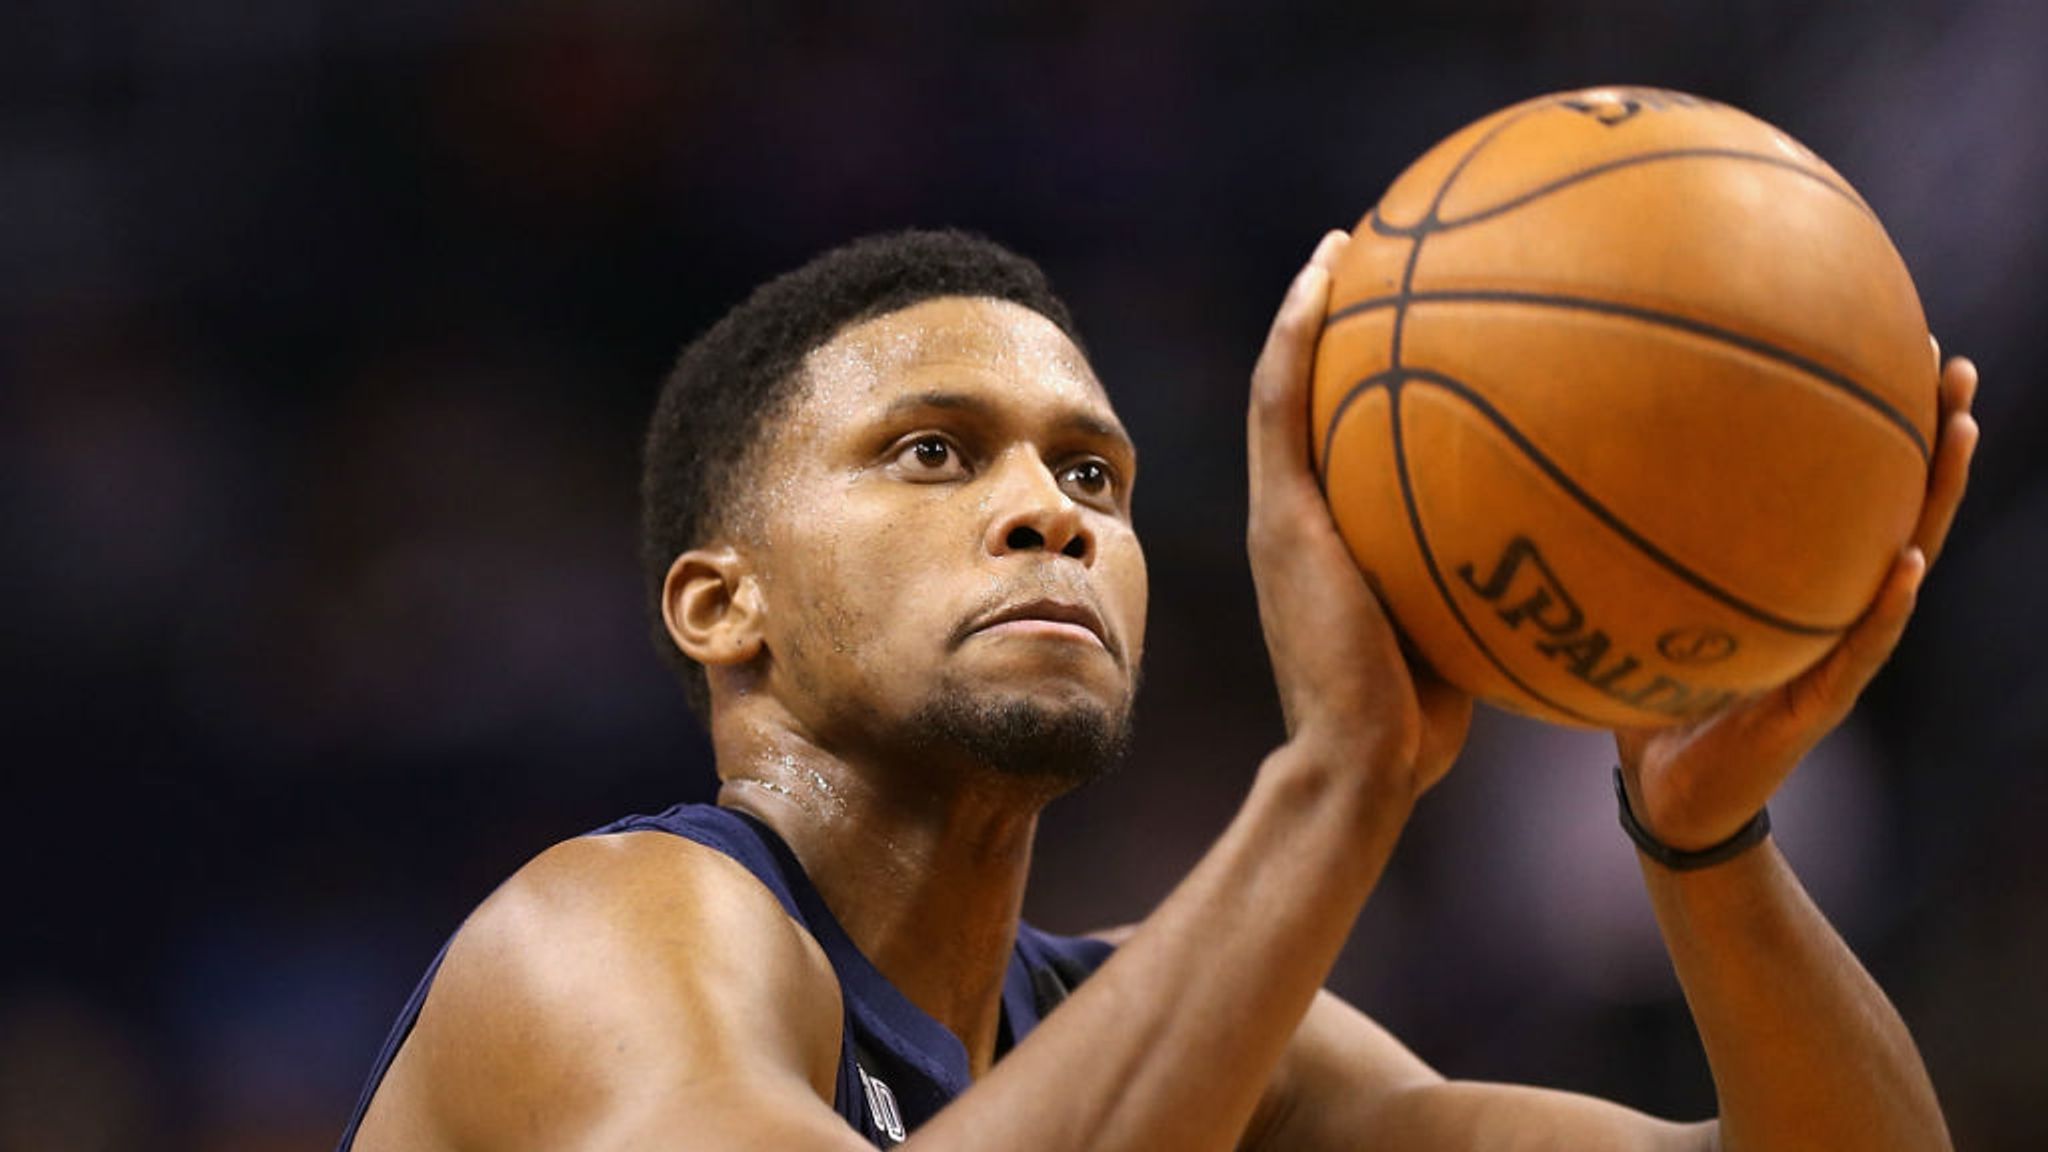 how long has rudy gay been in the nba